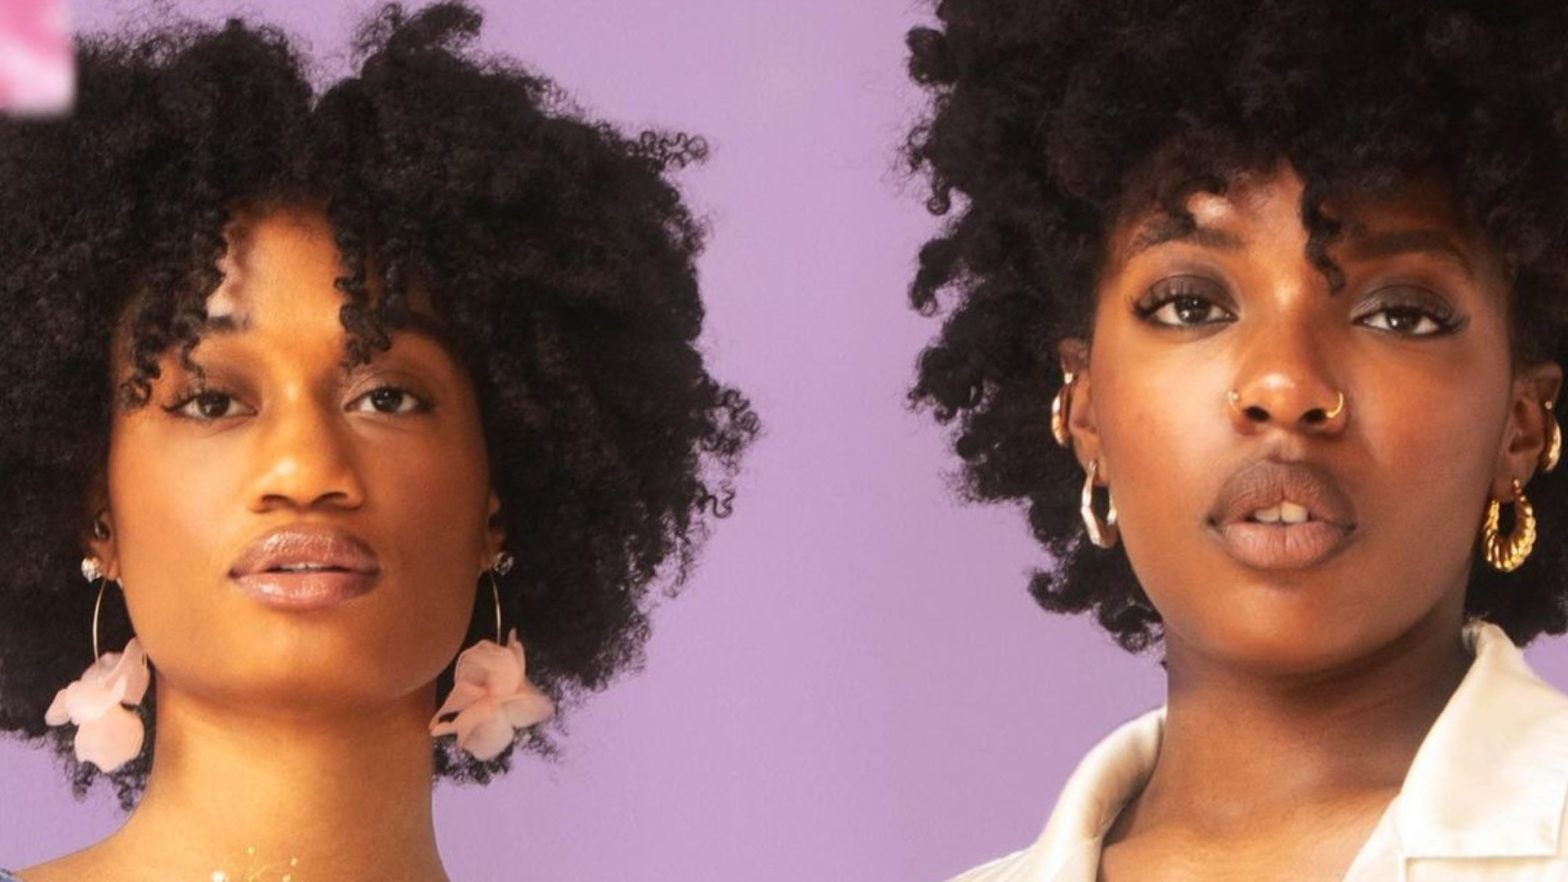 Skipping This Haircare Step Might Be The Reason Behind Your Dehyrated Hair